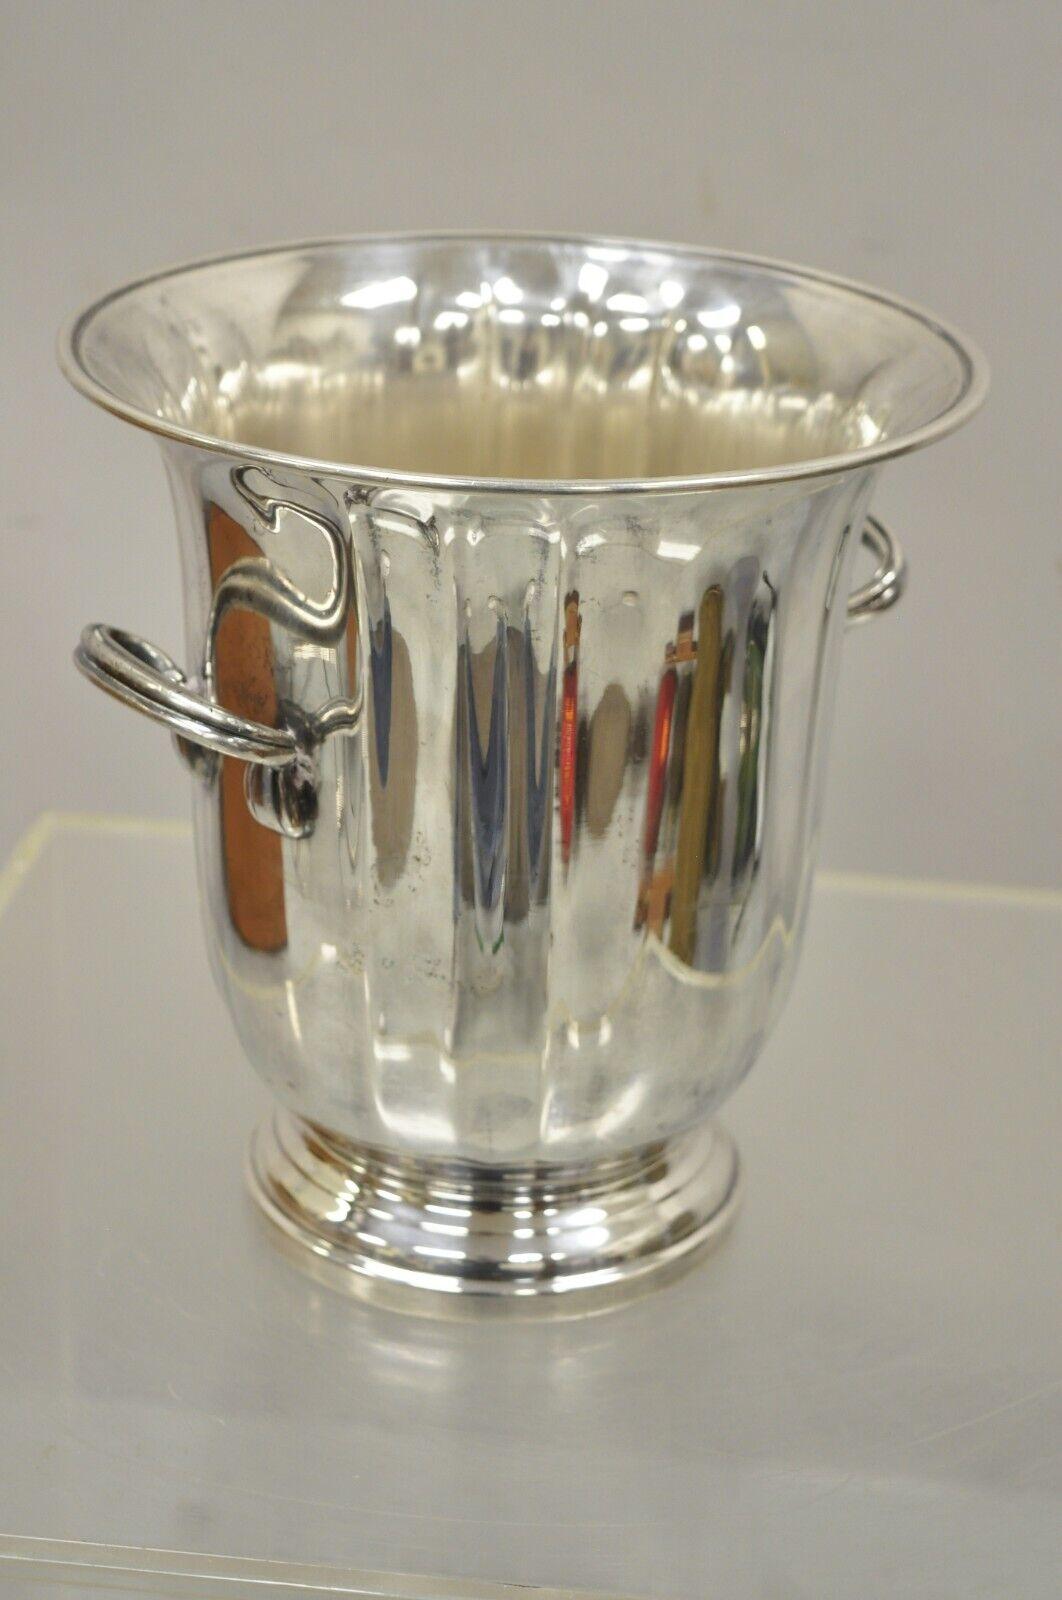 Gorham EP YH 30 Regency style silver plate champagne chiller ice bucket. Item features twin handles, fluted top, original stamp, very nice vintage item, quality craftsmanship, great style and form. Circa early to mid 20th century. Measurements: 9.5